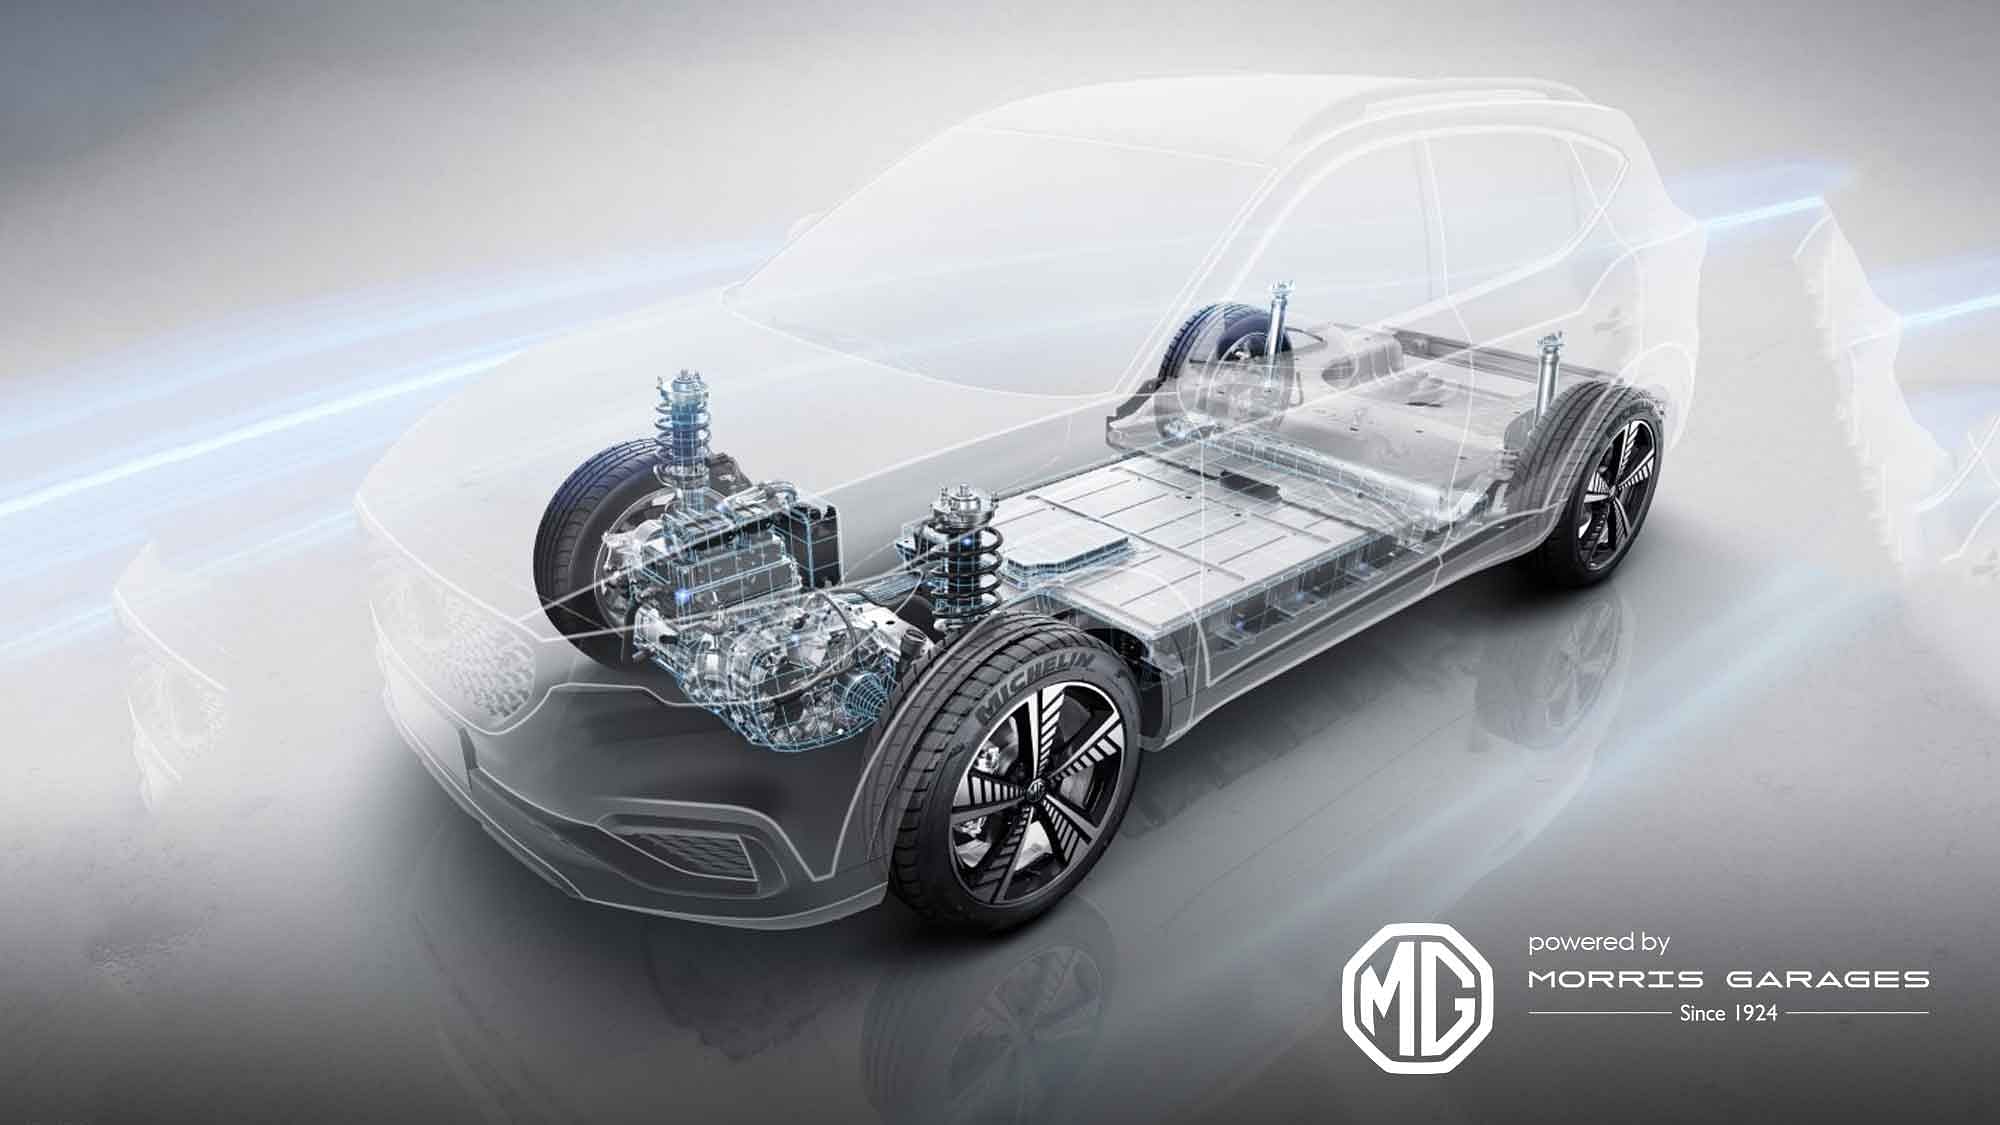 The international spec of the MG ZS EV is powered by a 44.5kWh lithium-ion battery 